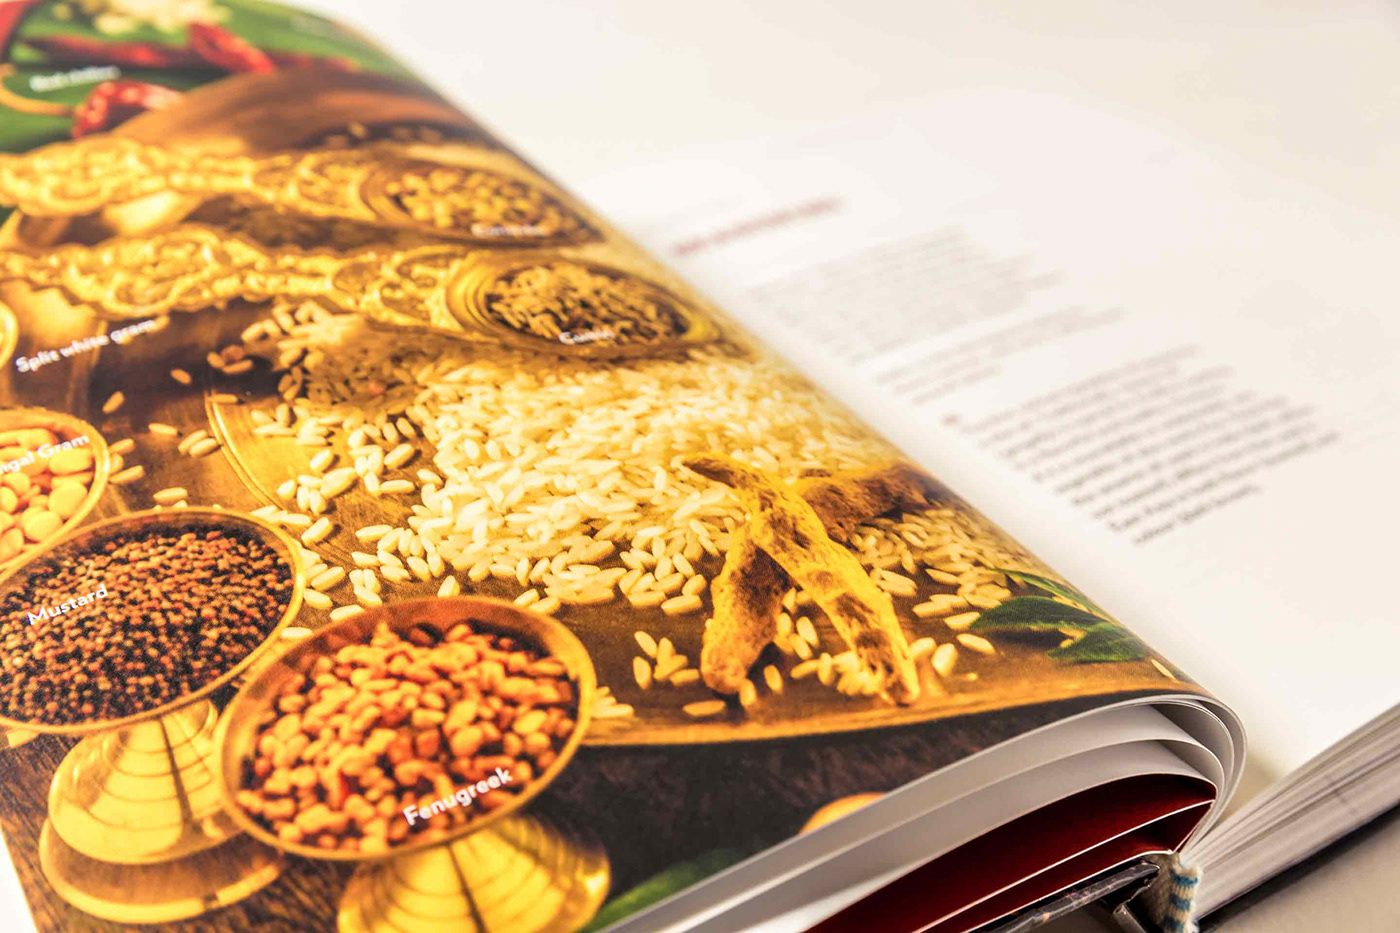 Open spread of the book's seasoning page.